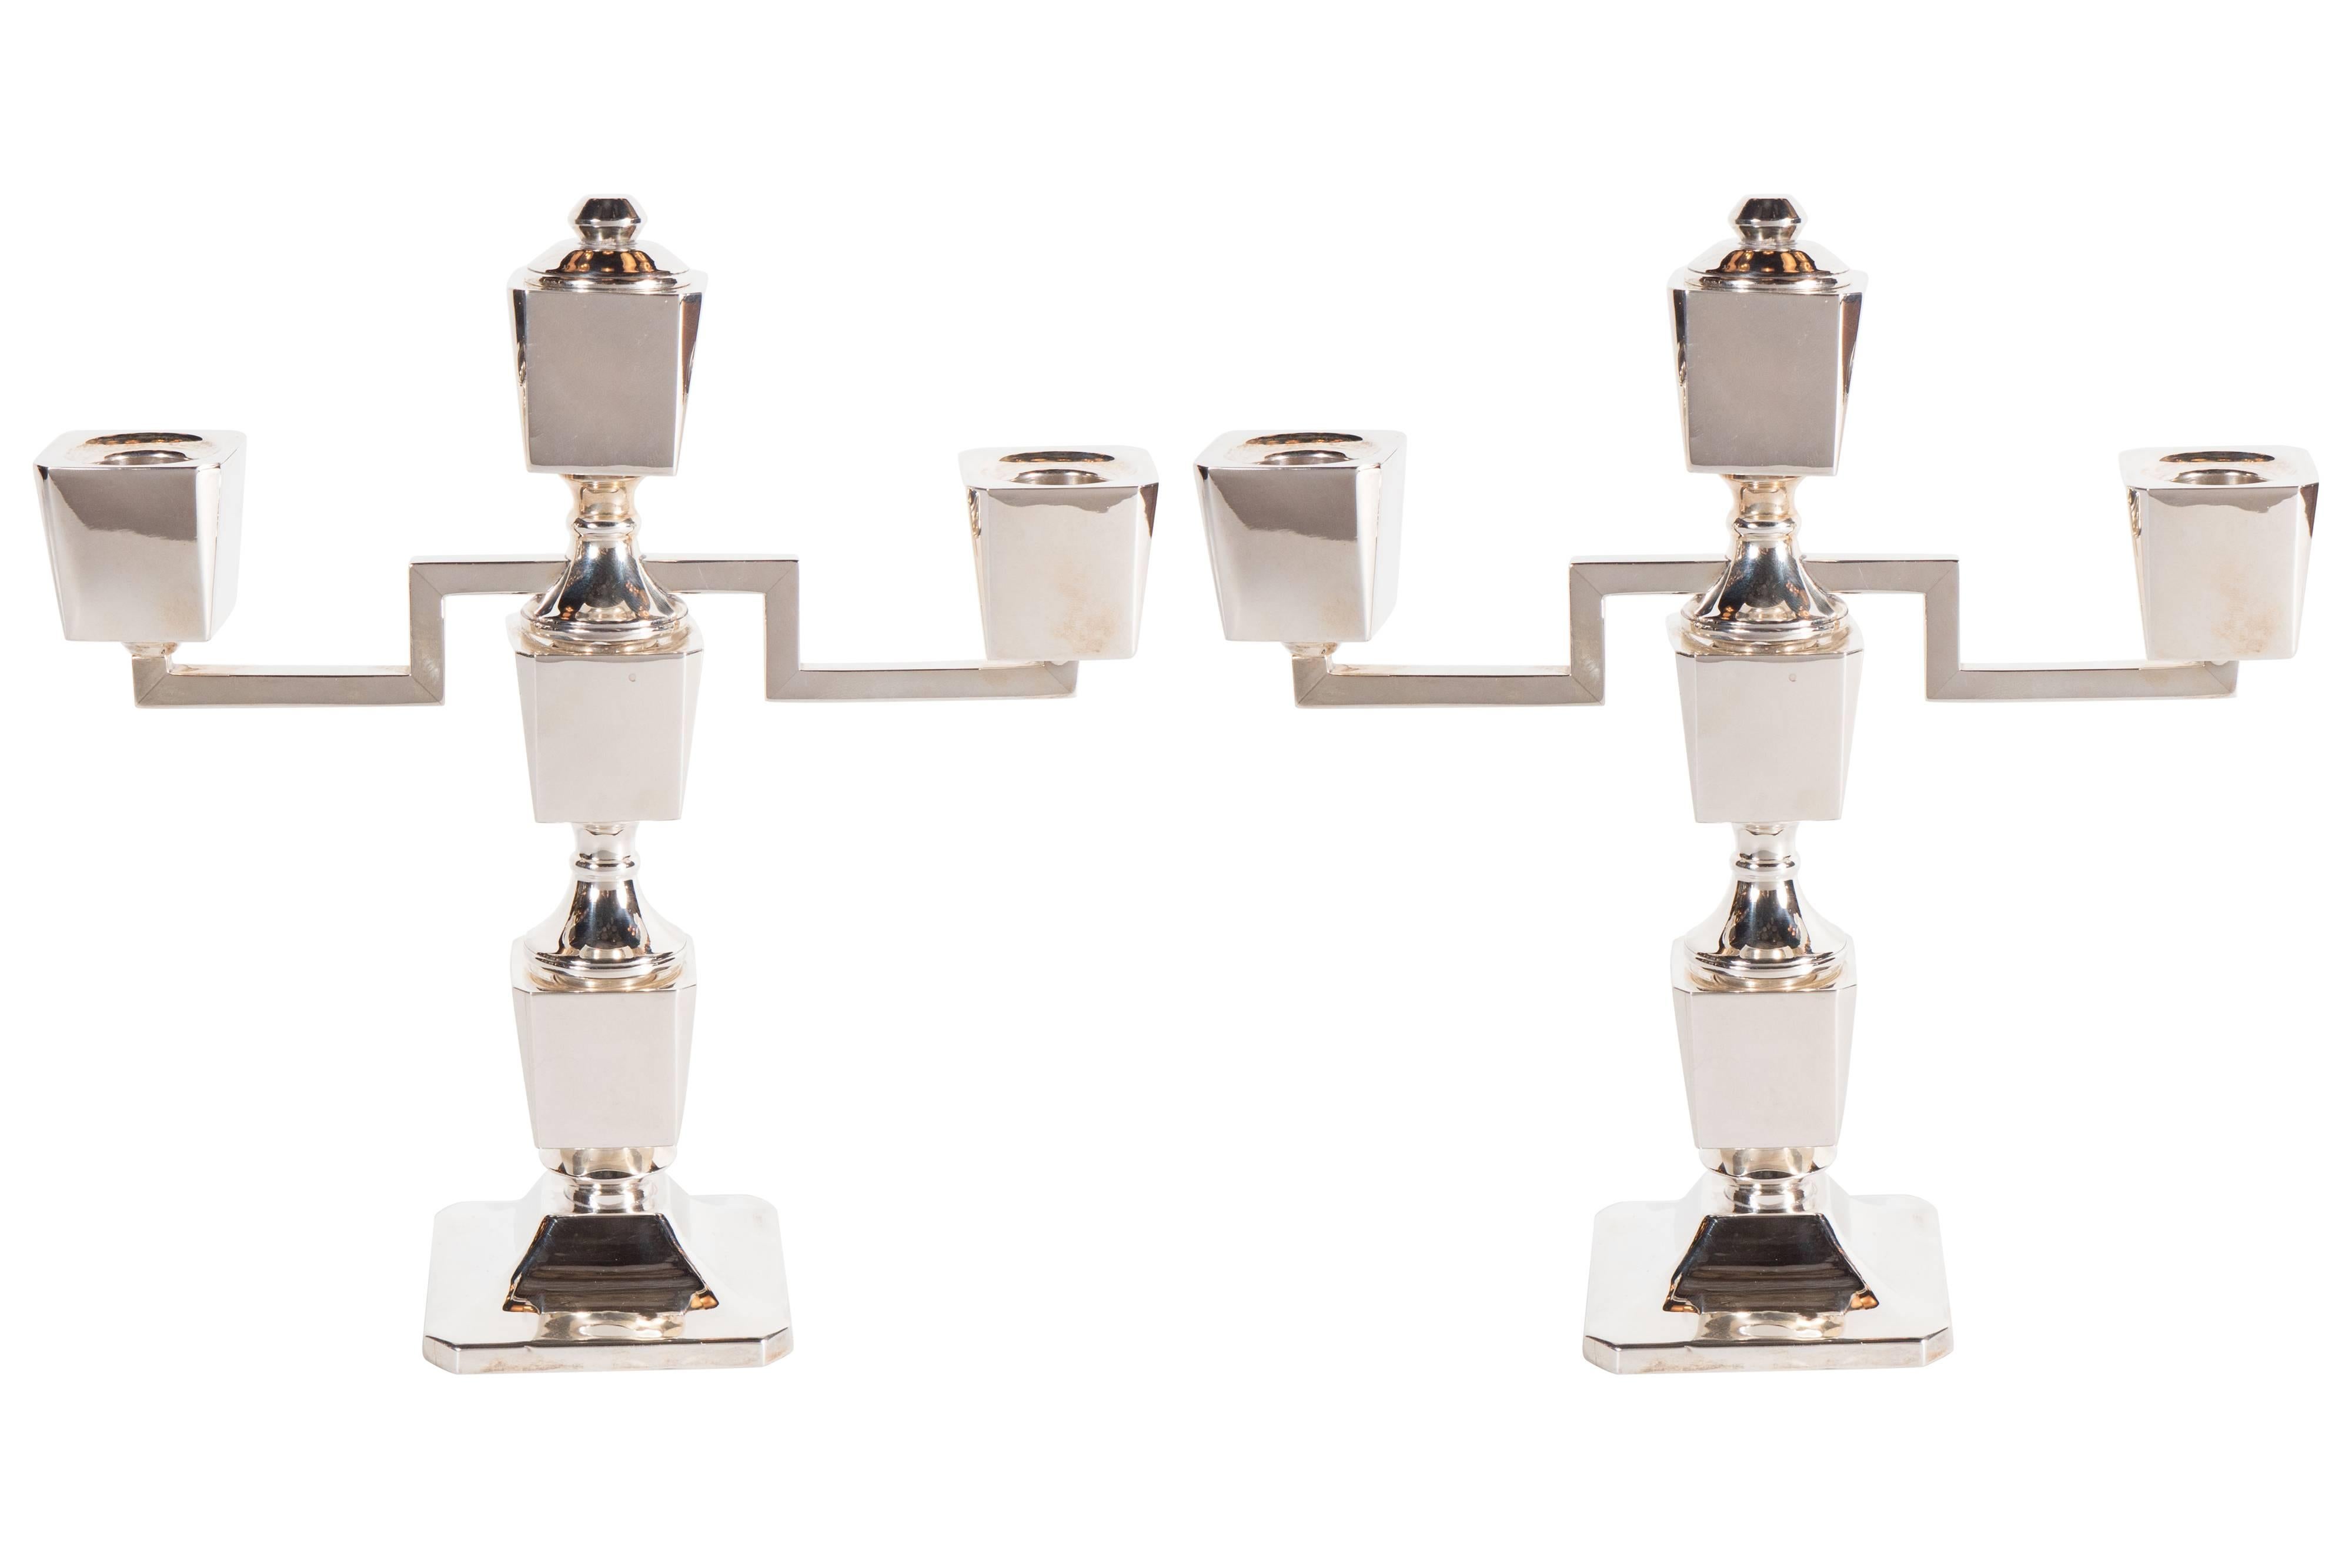 An Art Deco pair of modernist customizable/adjustable sterling silver candlesticks. Each candlestick can be modified to adjust its height in five different ways to either support one, two or three candles. A decorative and functional cap piece can